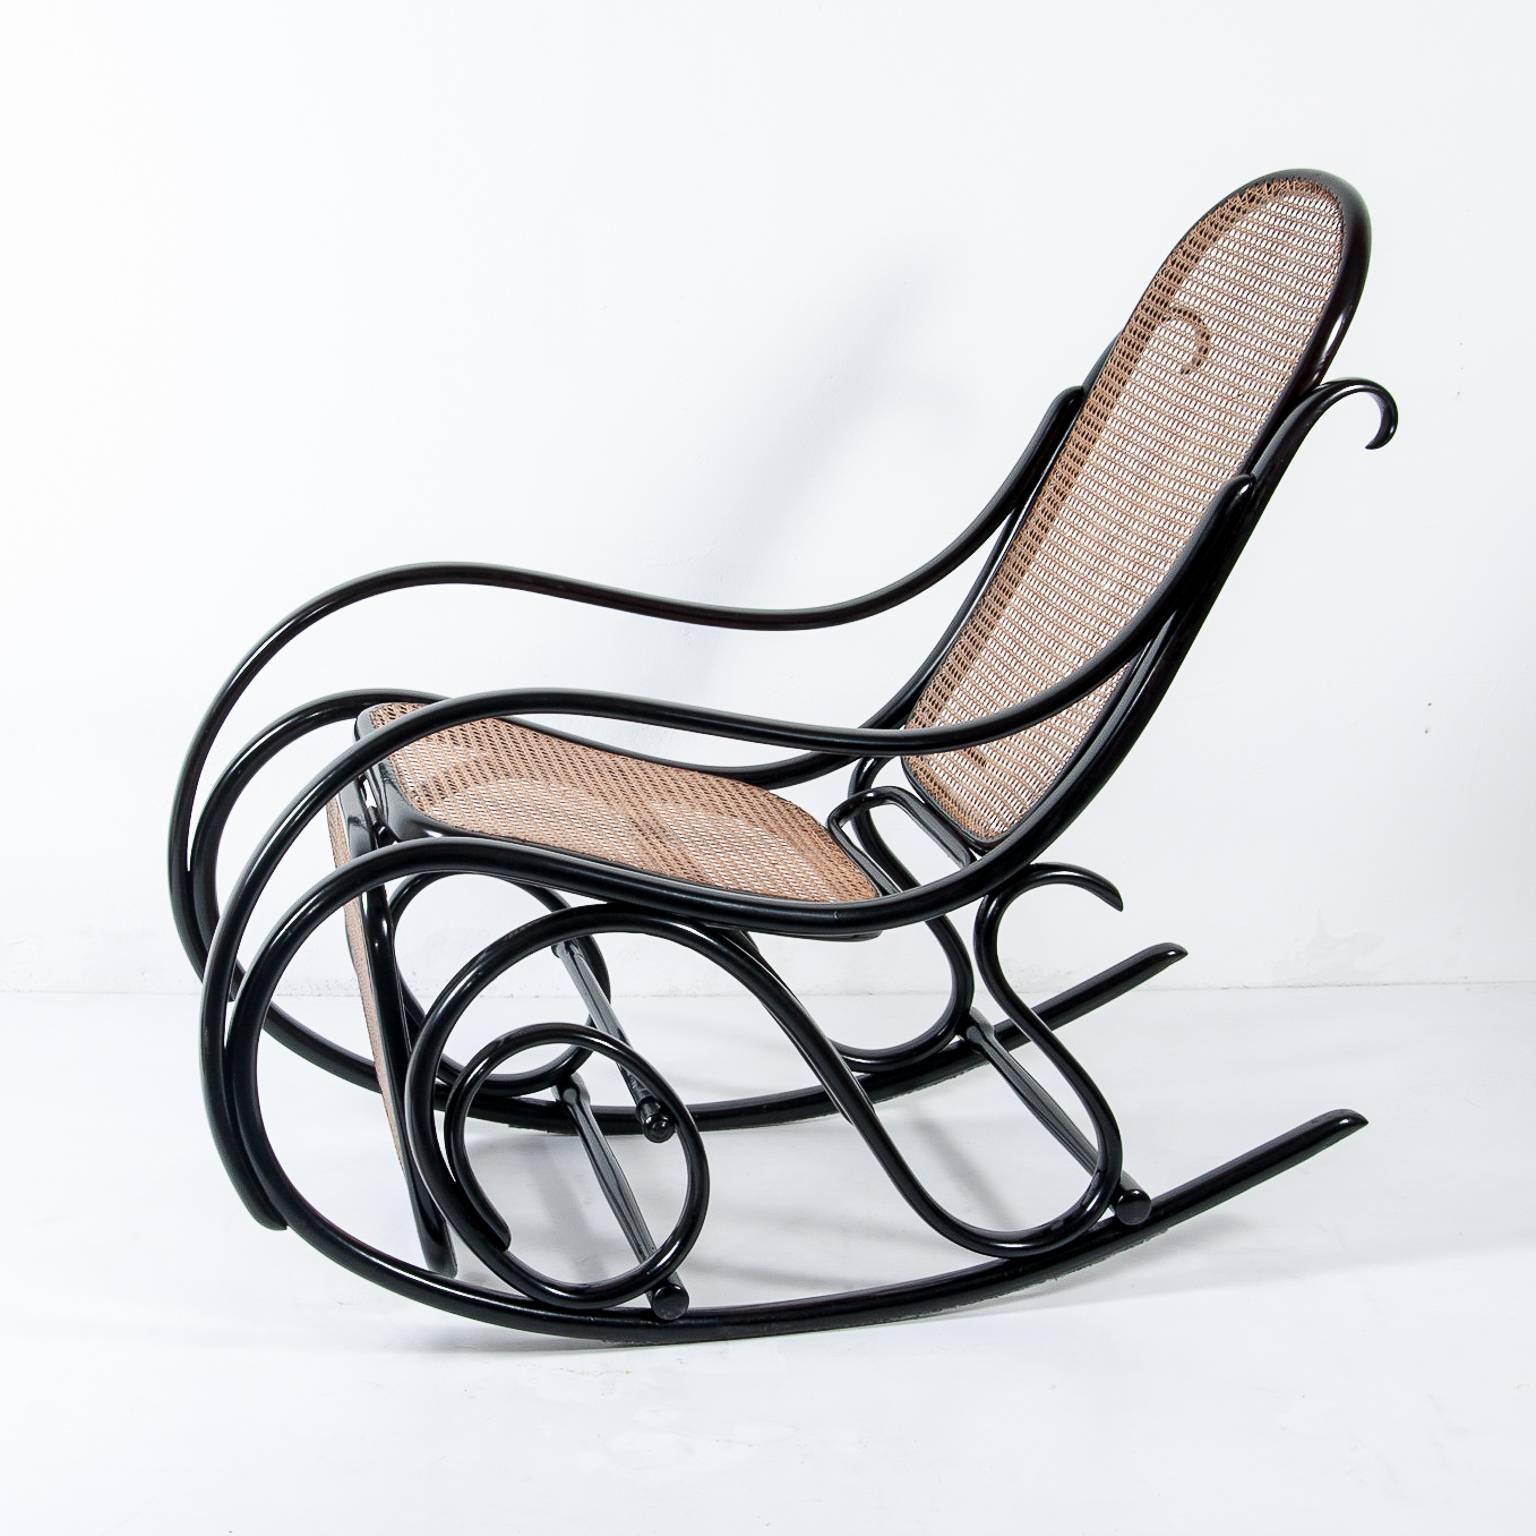 Thonet rocking chair No. 10 very rare with wickerwork footrest.
Black finish.
Perfect condition! 
Designed 1880.
Manufactured between 1890-1910.